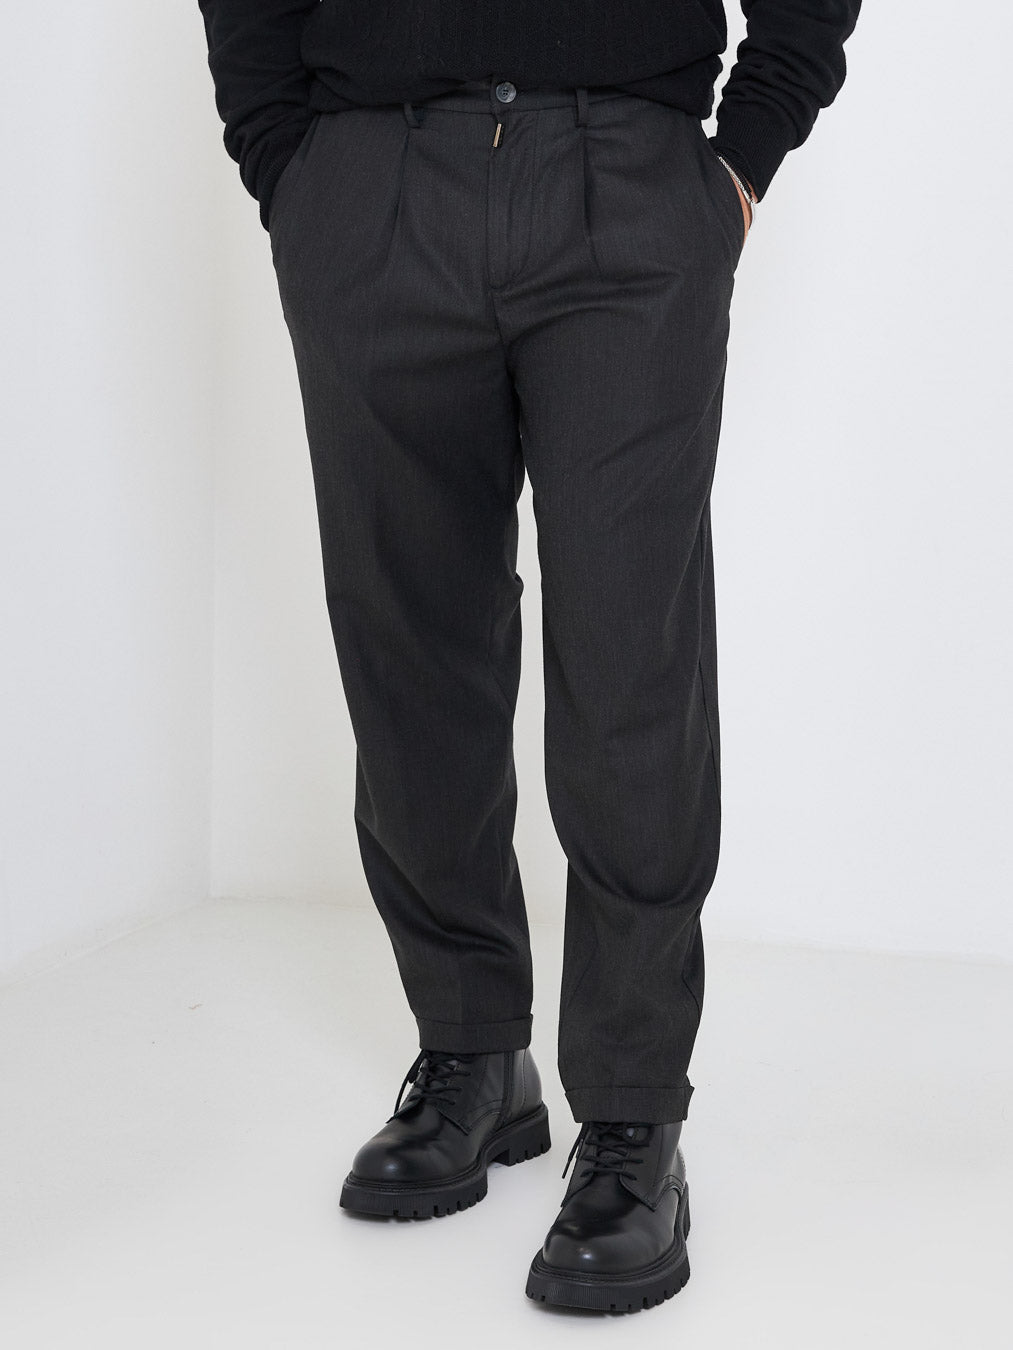 Prime black trousers with elasticated waist